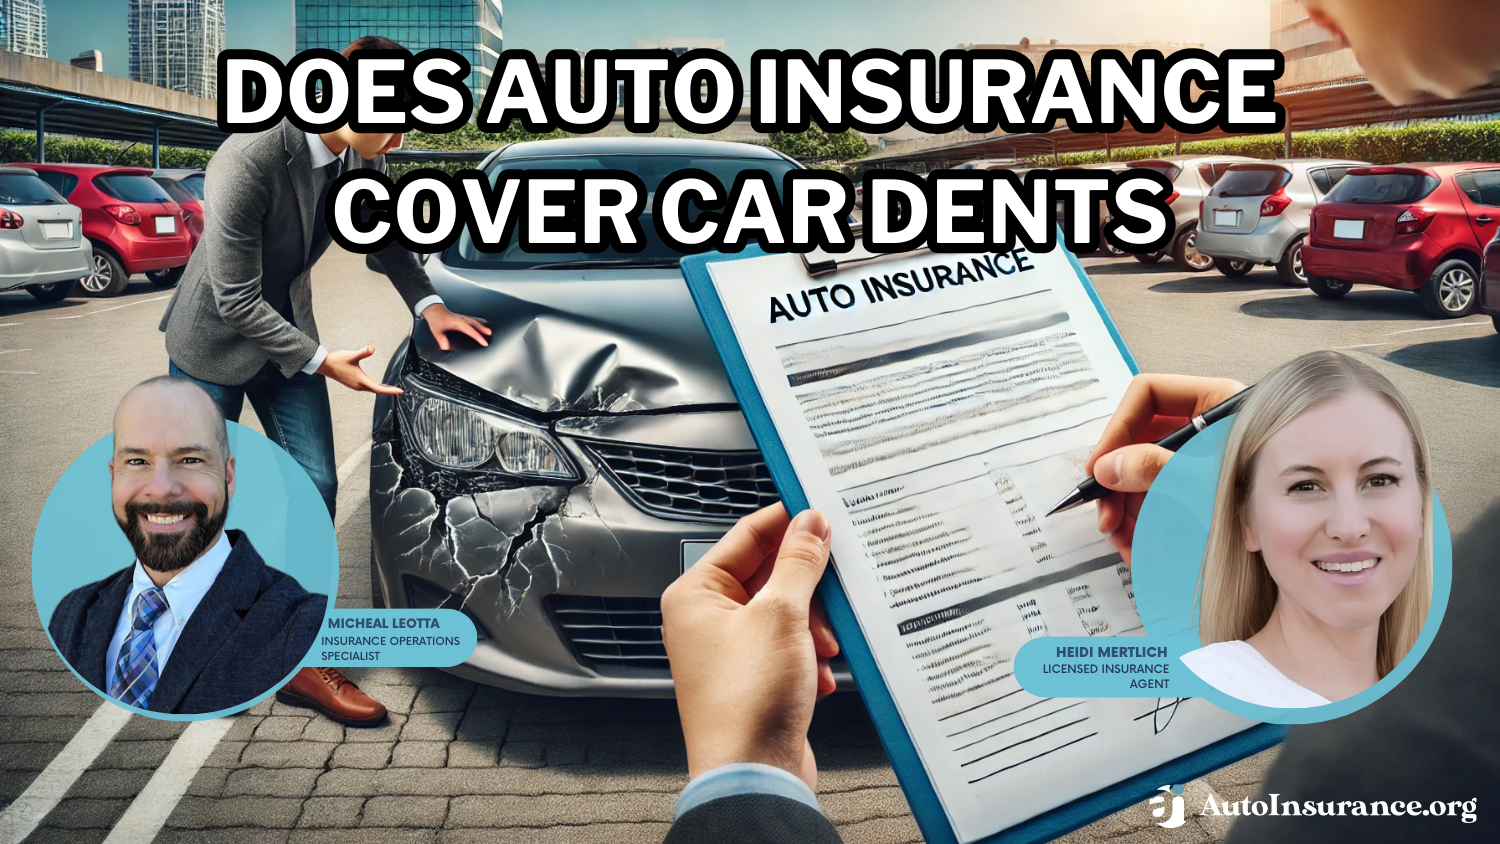 Does auto insurance cover car dents?